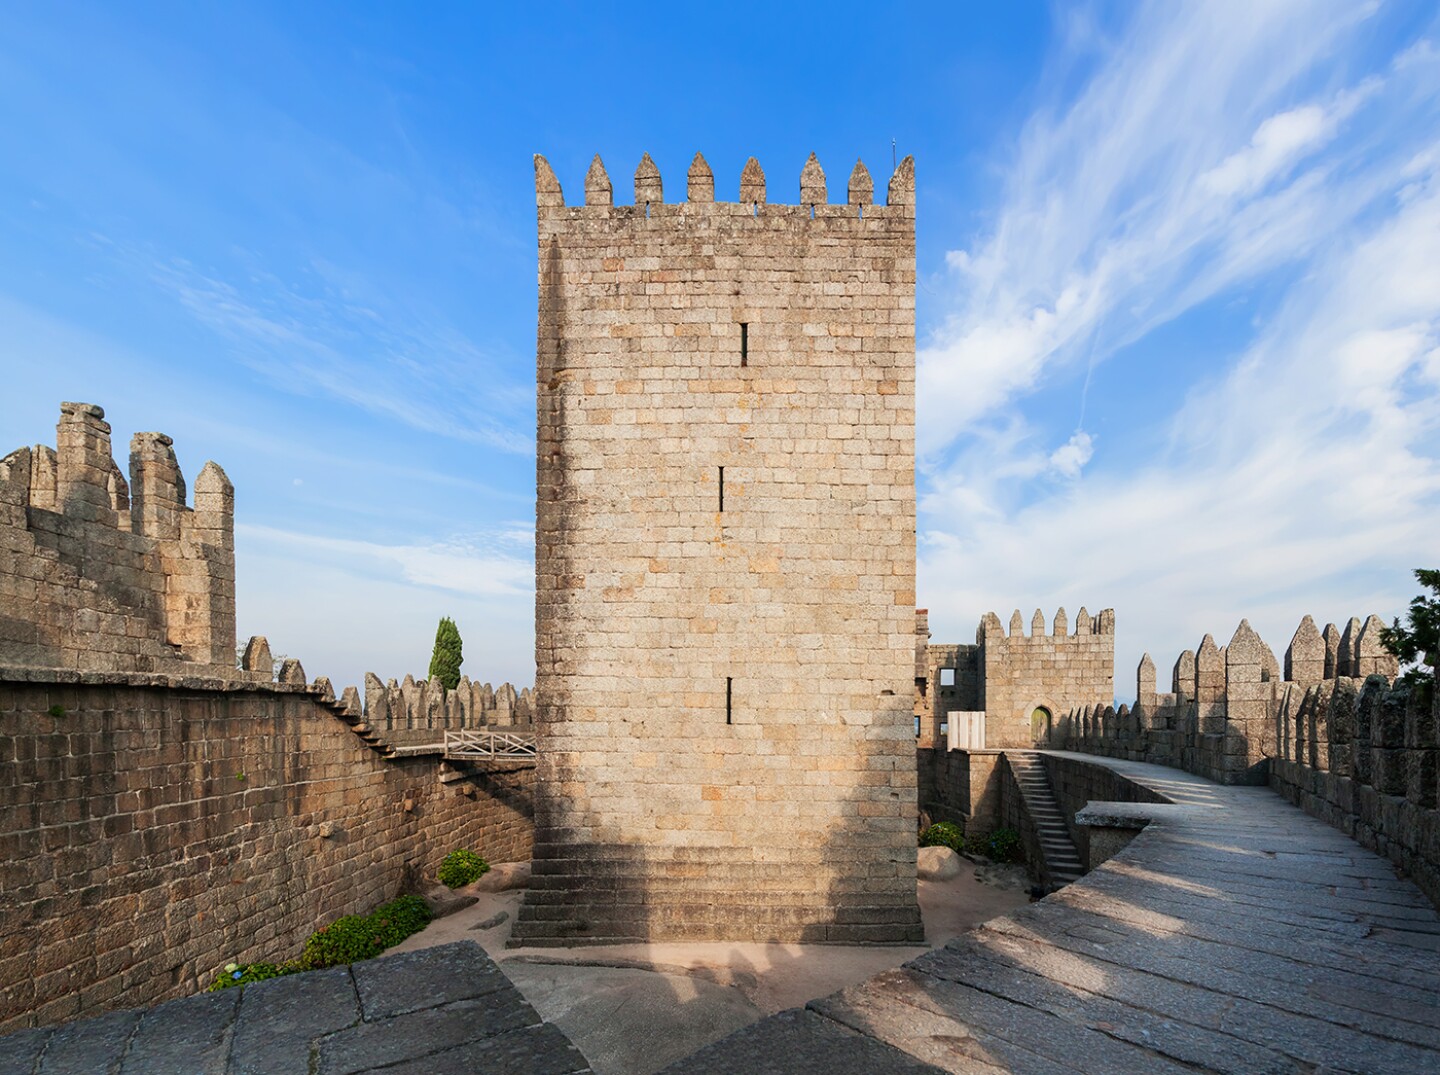 <h2>8. Castle of Guimarães</h2> <p><i>Guimarães, Portugal</i></p> <p> If you want to see where Portugal began, head to the <a class="Link" href="https://afonsina.guimaraes.pt/paco/?page_id=884&lang=en" rel="noopener">Castle of Guimarães</a>, the birthplace of the nation’s first king, Afonso Henriques, in 1109. It’s perched on a hill above the northern Portuguese city of Guimarães, the country’s first capital. Over hundreds of years, the blocky crenellated towers of the mighty Romanesque fortress defended the nation against Moorish, Norse, and Spanish invaders. In the 16th century, it fell into disuse and was used primarily as a prison; it was classified as a national monument in 1881 and later restored. There’s not much left inside the walls, but the nominal entrance fee gets you access to the ramparts and the central keep’s permanent exhibition about the history of Guimarães and its castle.</p> <h3>How to visit Castle of Guimarães</h3> <p>It’s about a 10-minute stroll up to the castle from Guimarães, which can be reached in about 1.5 hours by train from Porto. There’s also a car park directly behind the castle.</p>